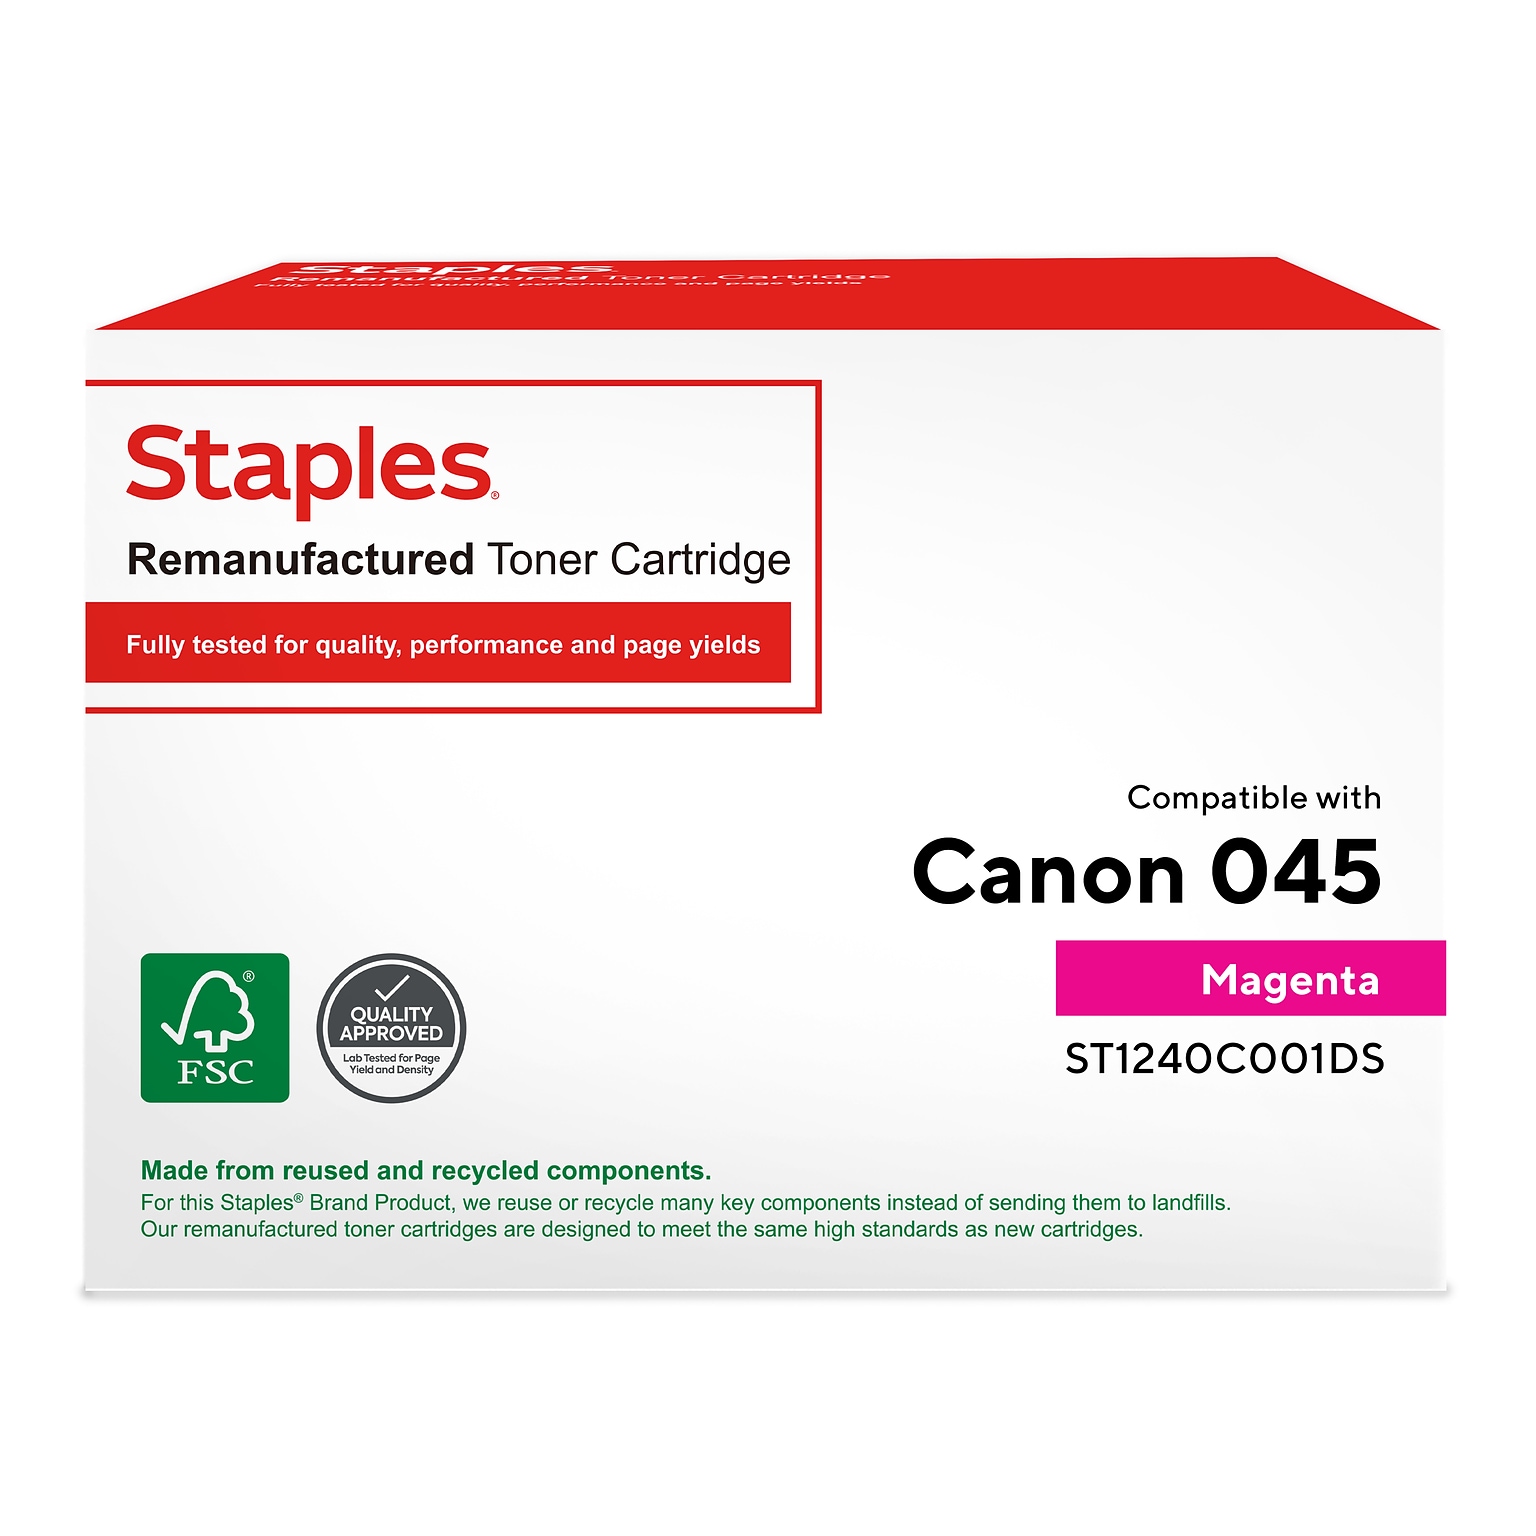 Staples Remanufactured Magenta Standard Yield Toner Cartridge Replacement for Canon 045 (TR1240C001DS/ST1240C001DS)